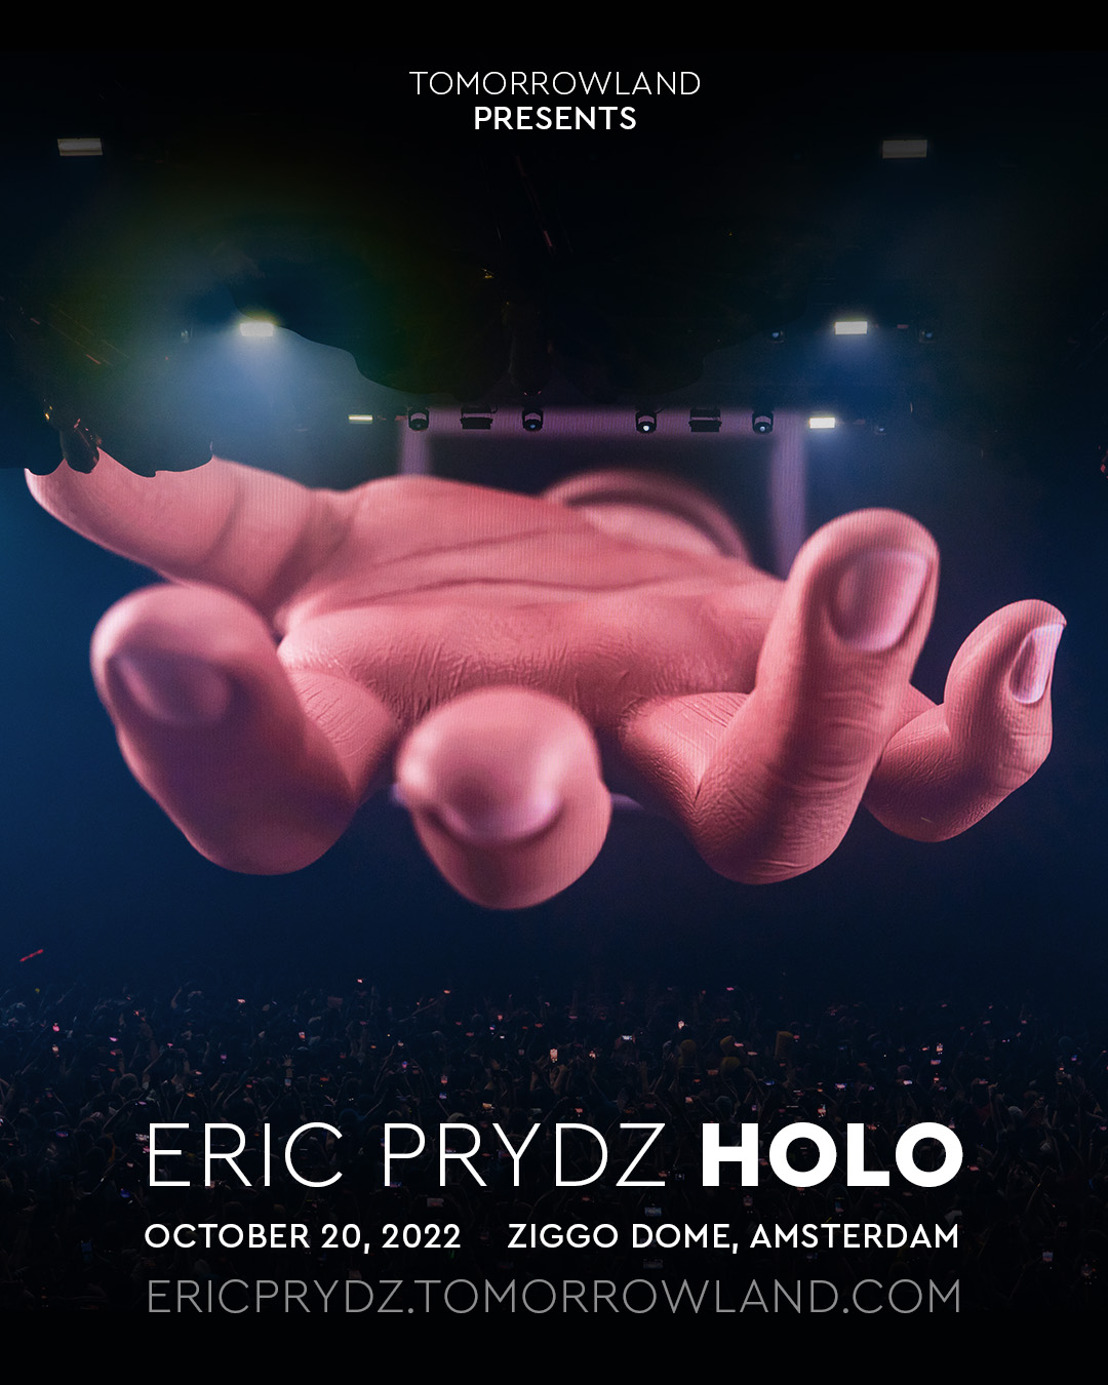 Tomorrowland presents Eric Prydz HOLO at Amsterdam Dance Event